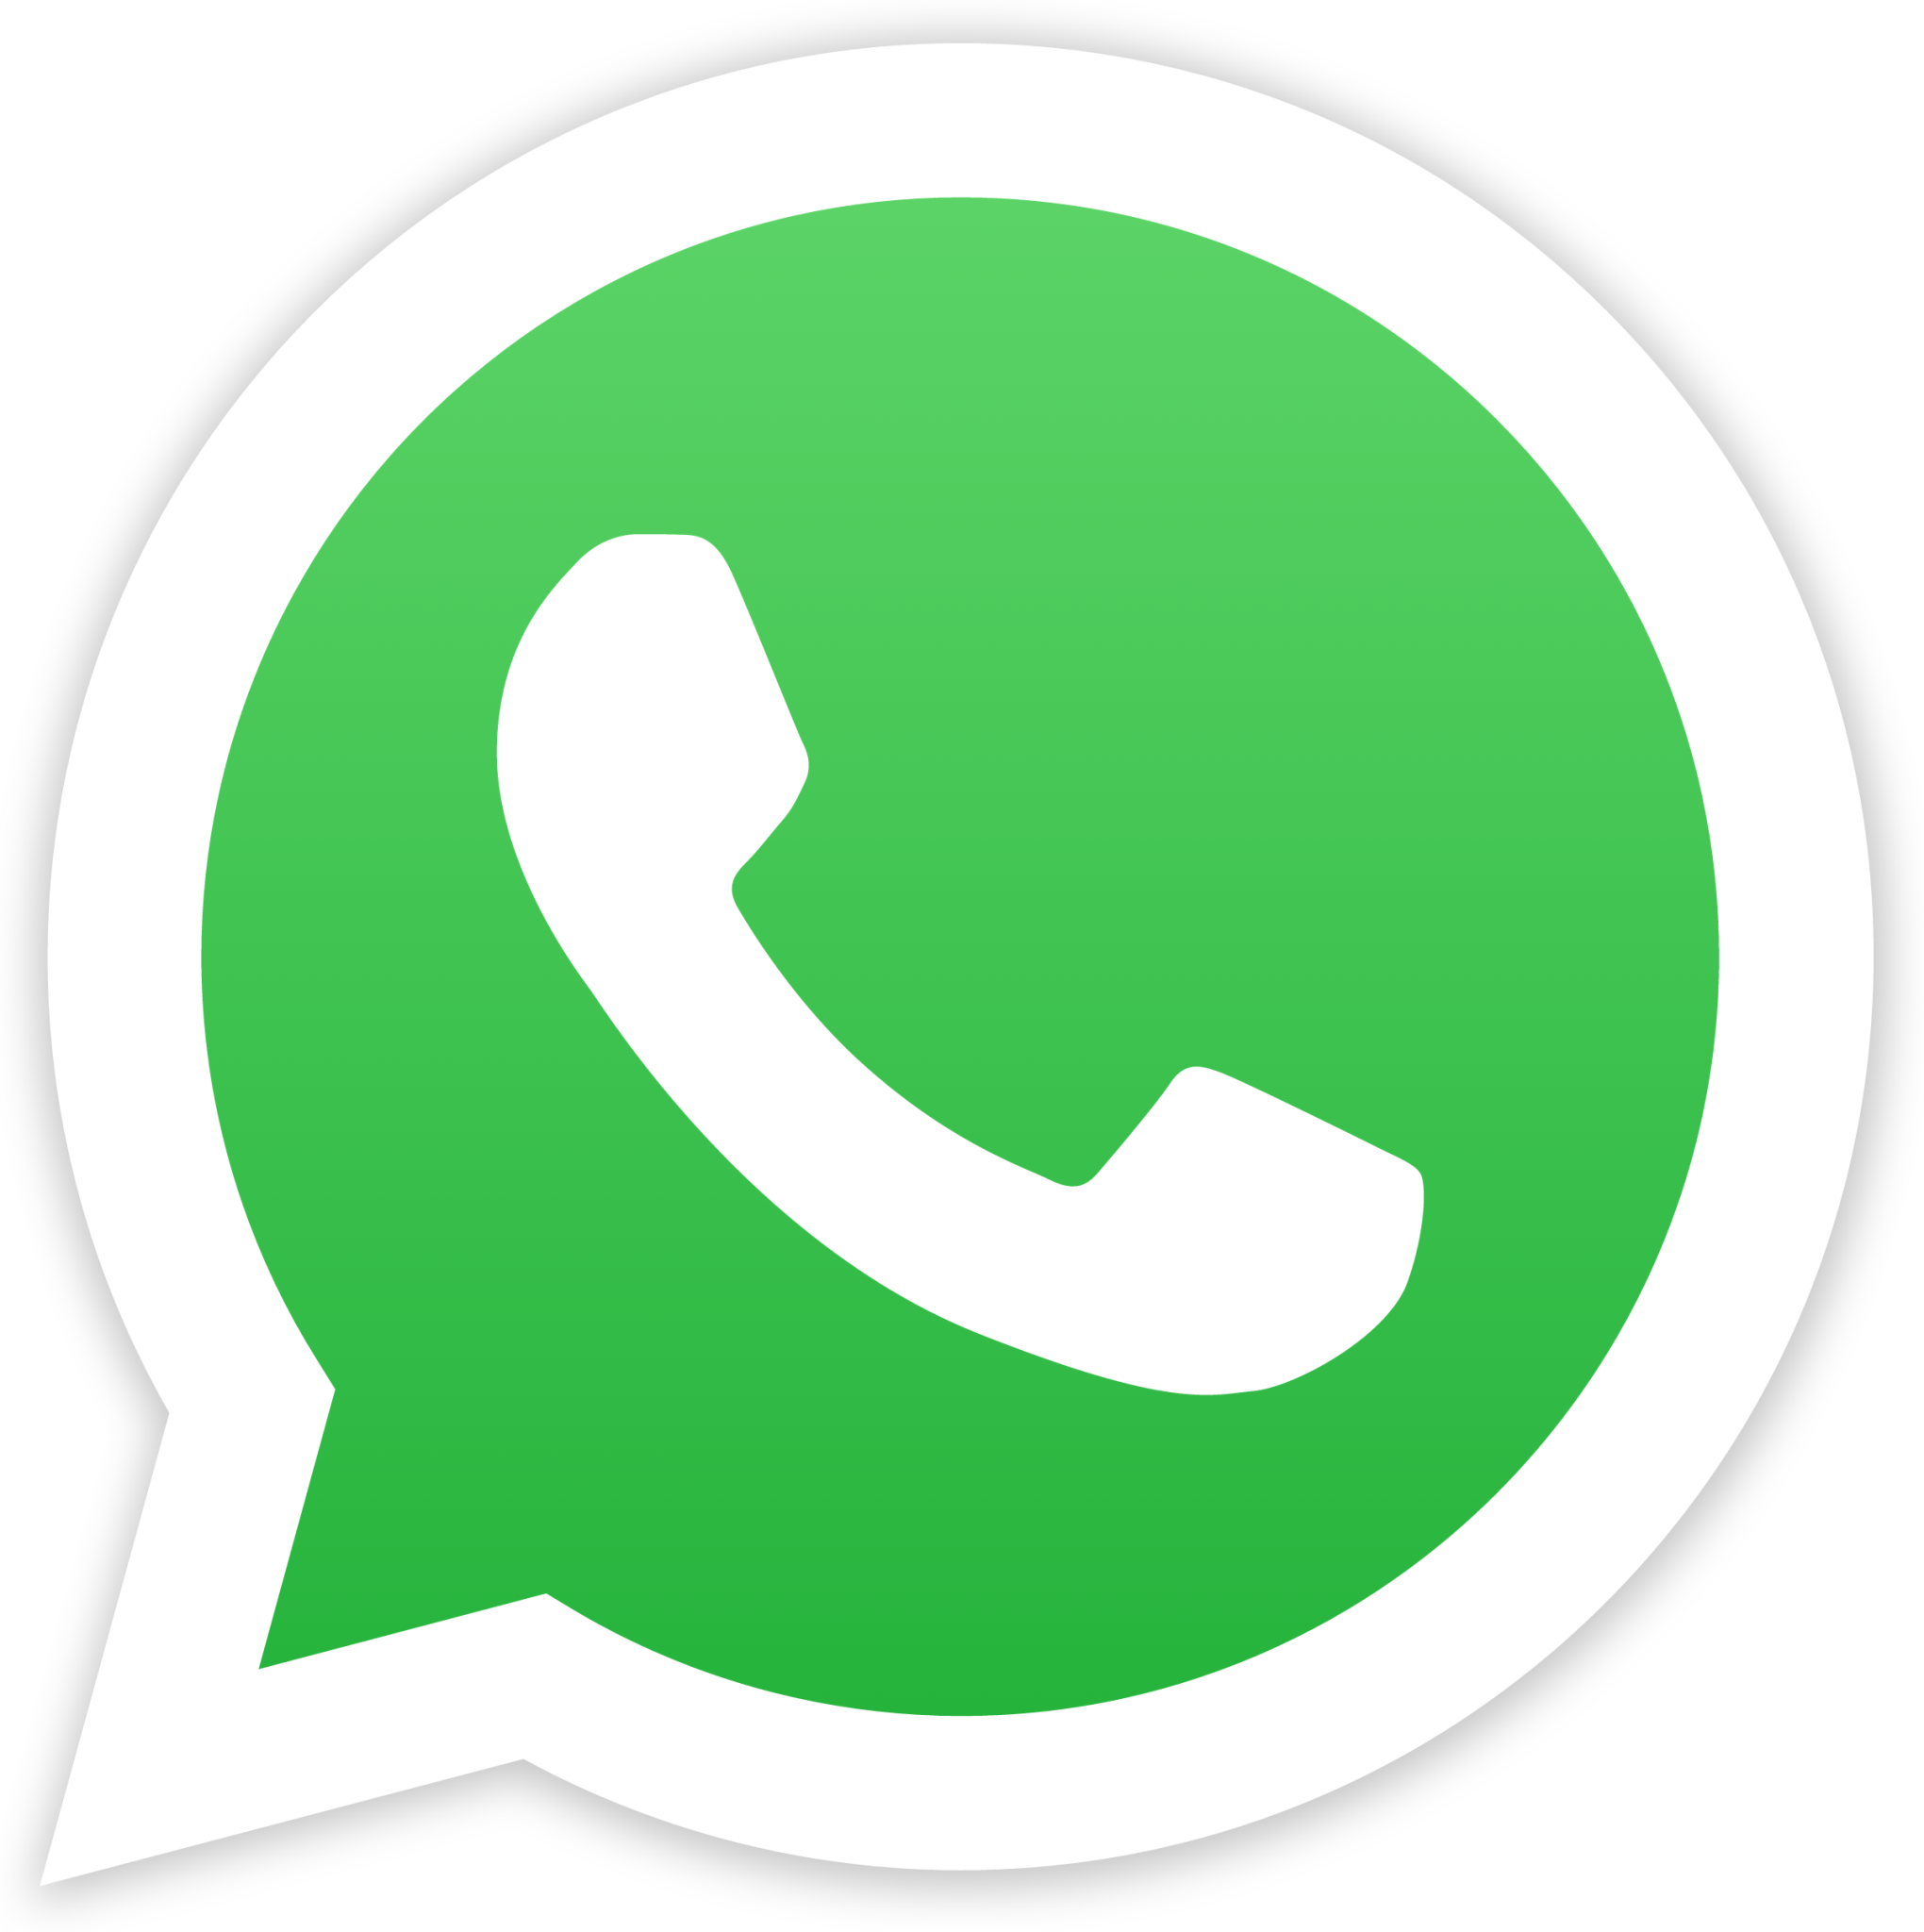 whatsapp" Icon - Download for free – Iconduck